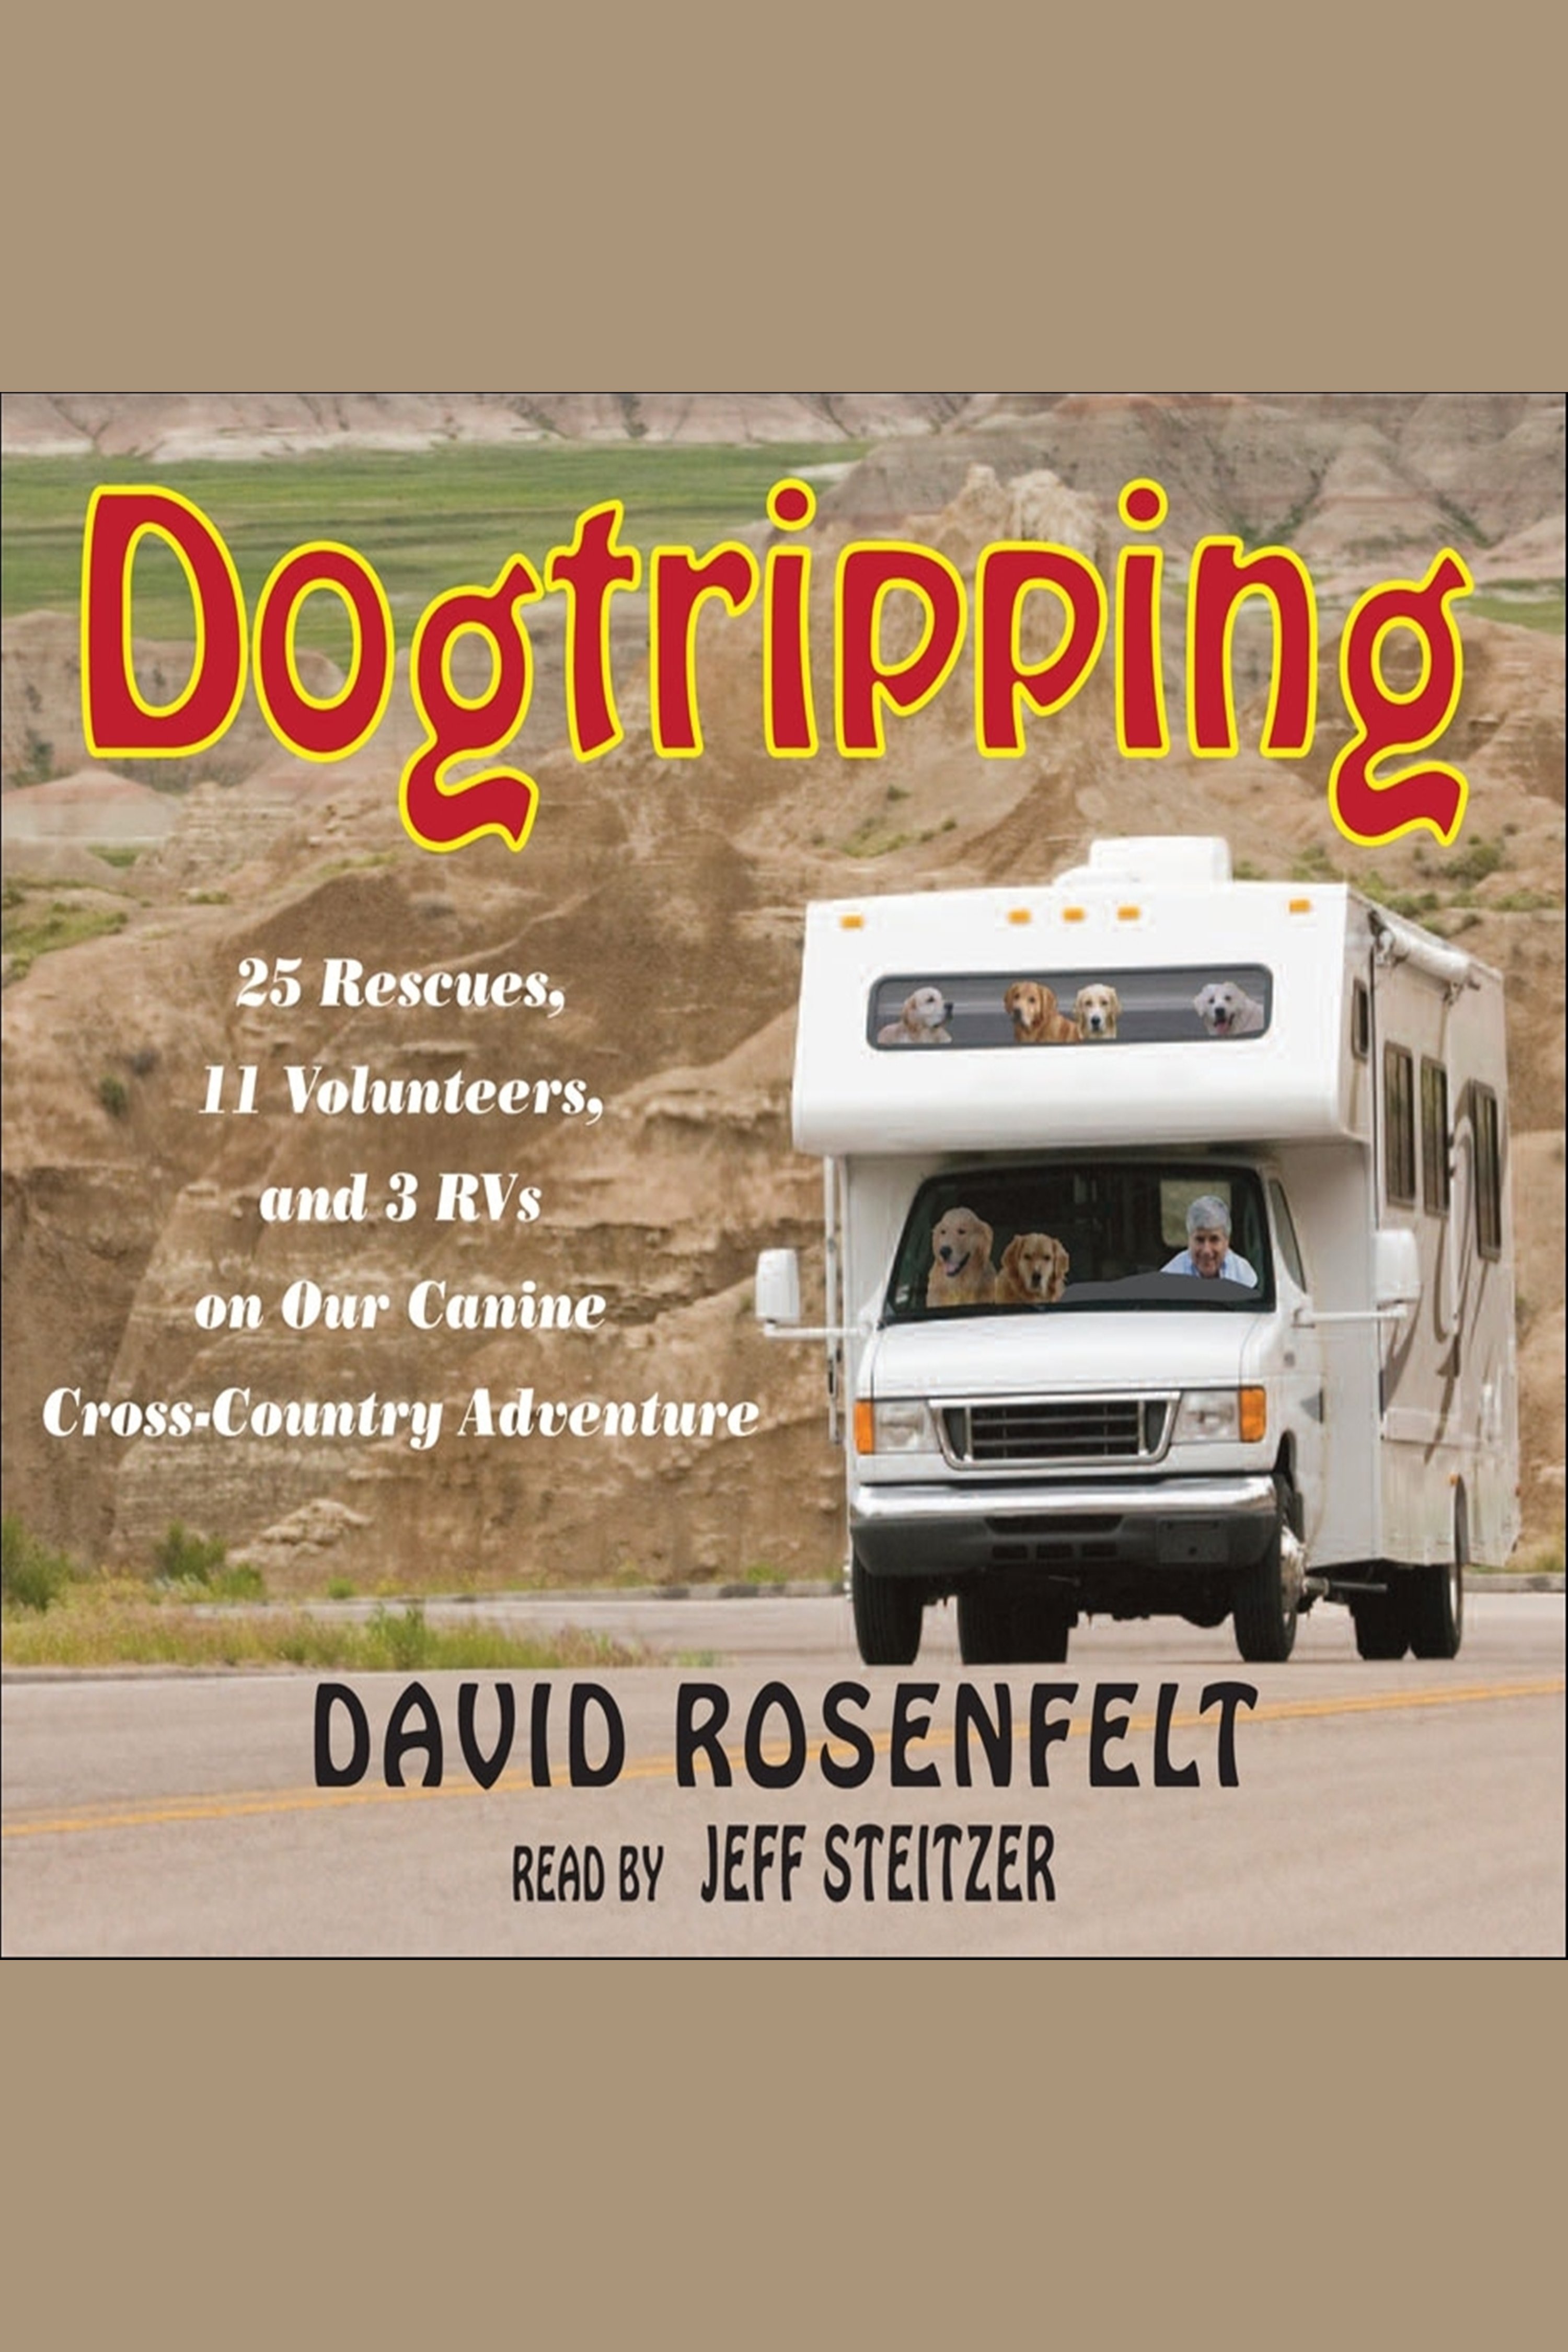 Image de couverture de Dogtripping [electronic resource] : 25 Rescues, 11 Volunteers, and 3 RVs on Our Canine Cross-Country Adventure